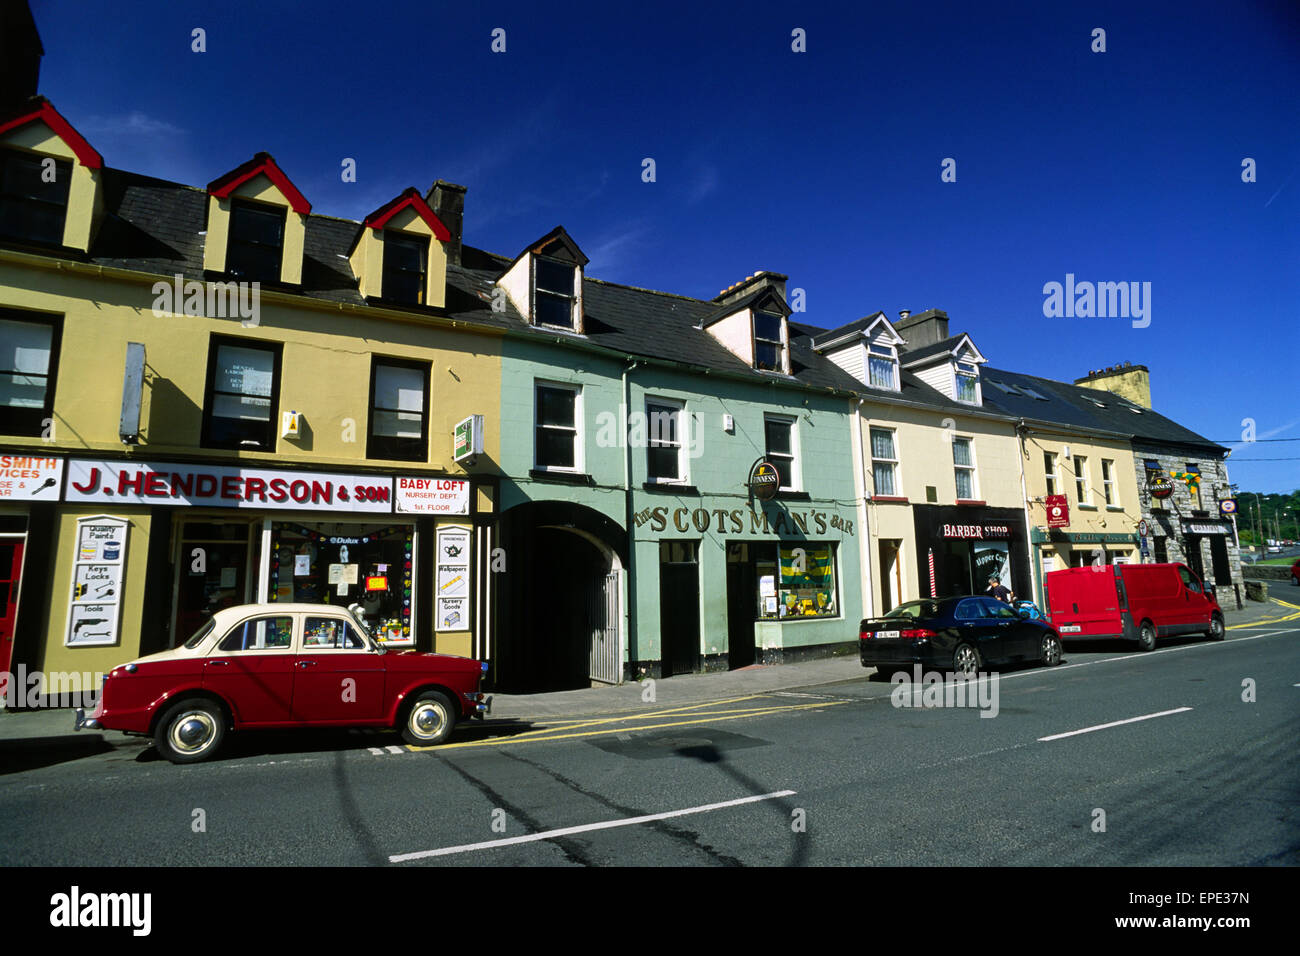 Irland, County Donegal, Stadt Donegal Stockfoto